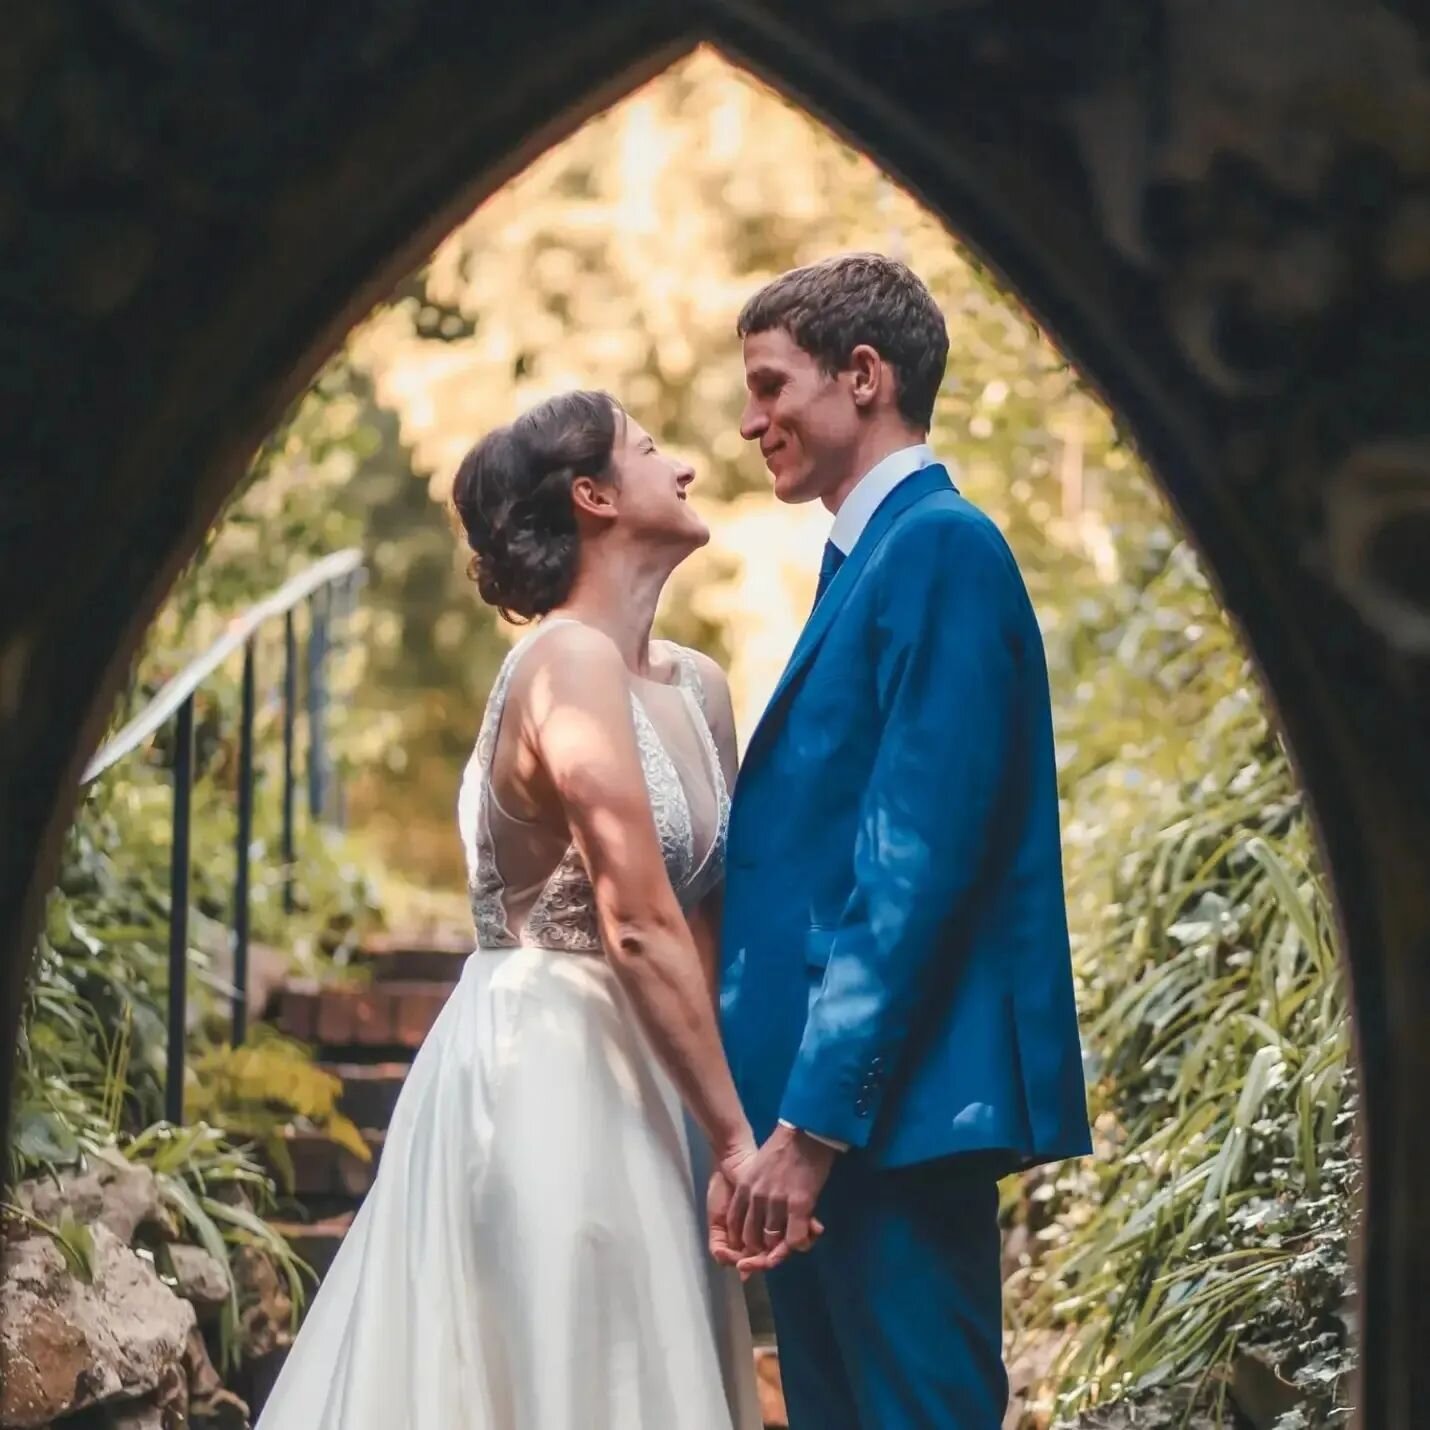 Congratulations Grace &amp; Jack on your wedding day! It was an honour to capture your special moments at the iconic @goldneyevents in Bristol. These sneak peek photos are just a glimpse of the joy and love that surrounded you both on your big day.

